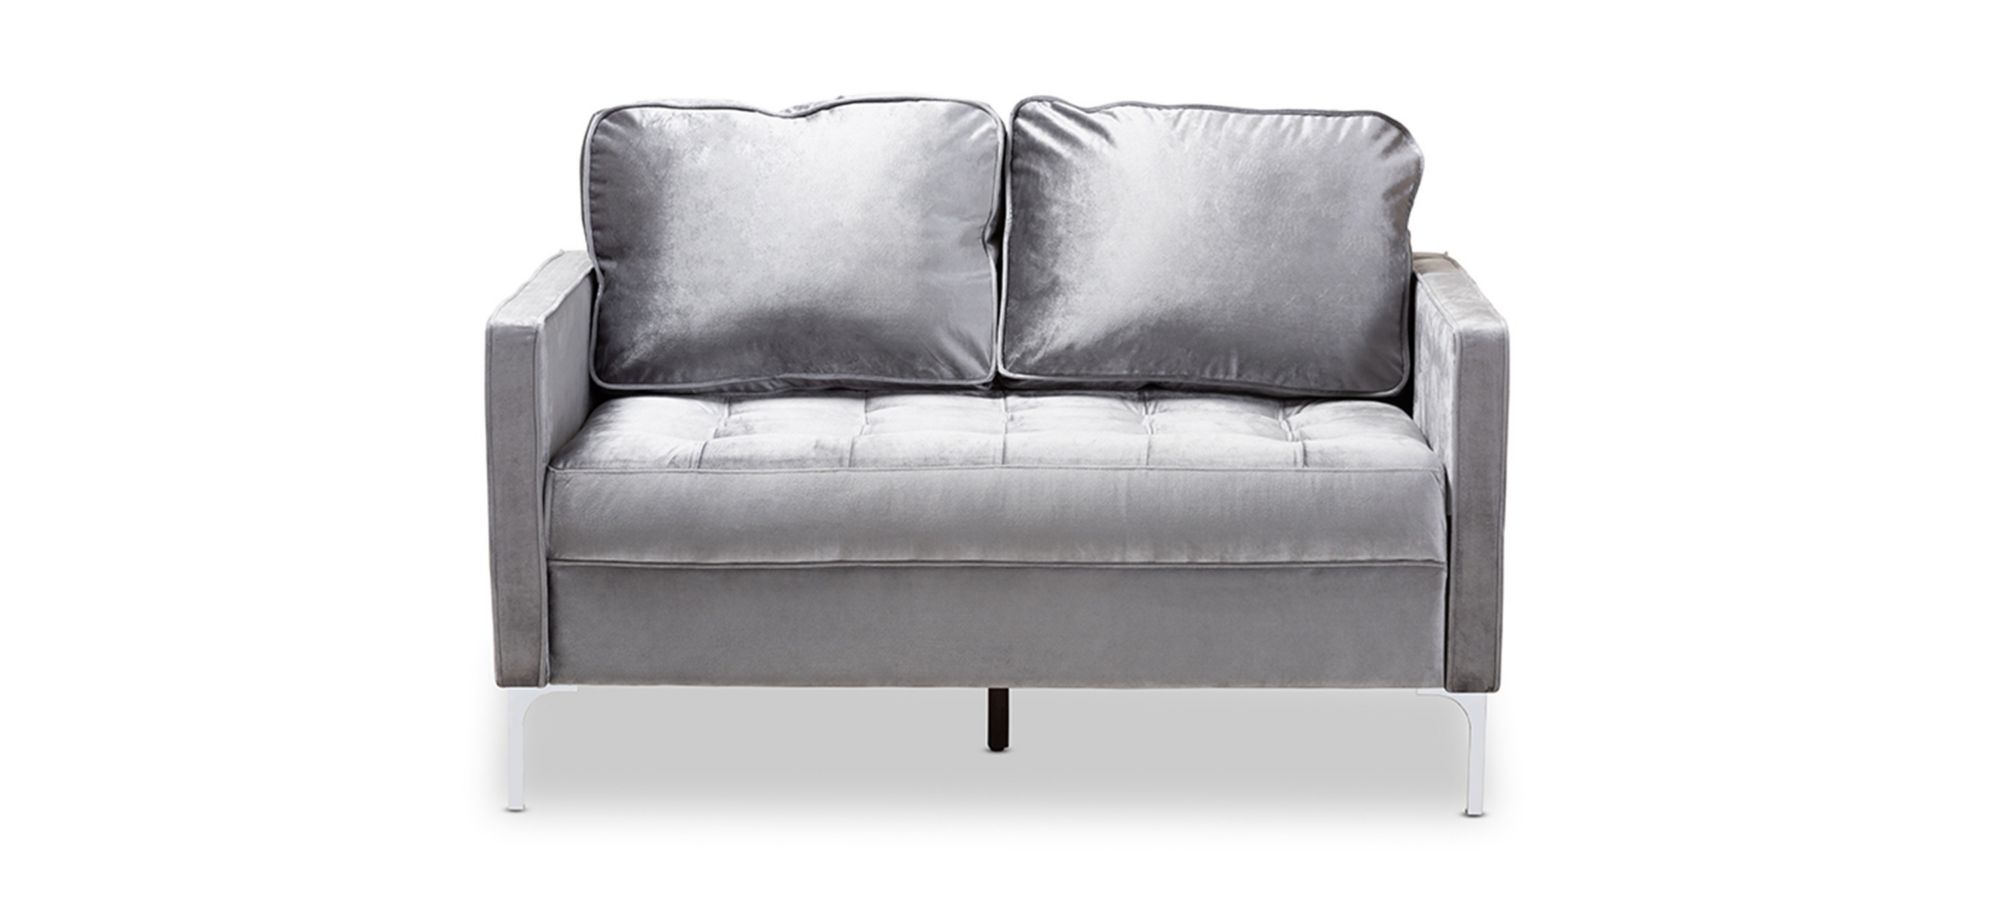 Clara Loveseat in Gray by Wholesale Interiors